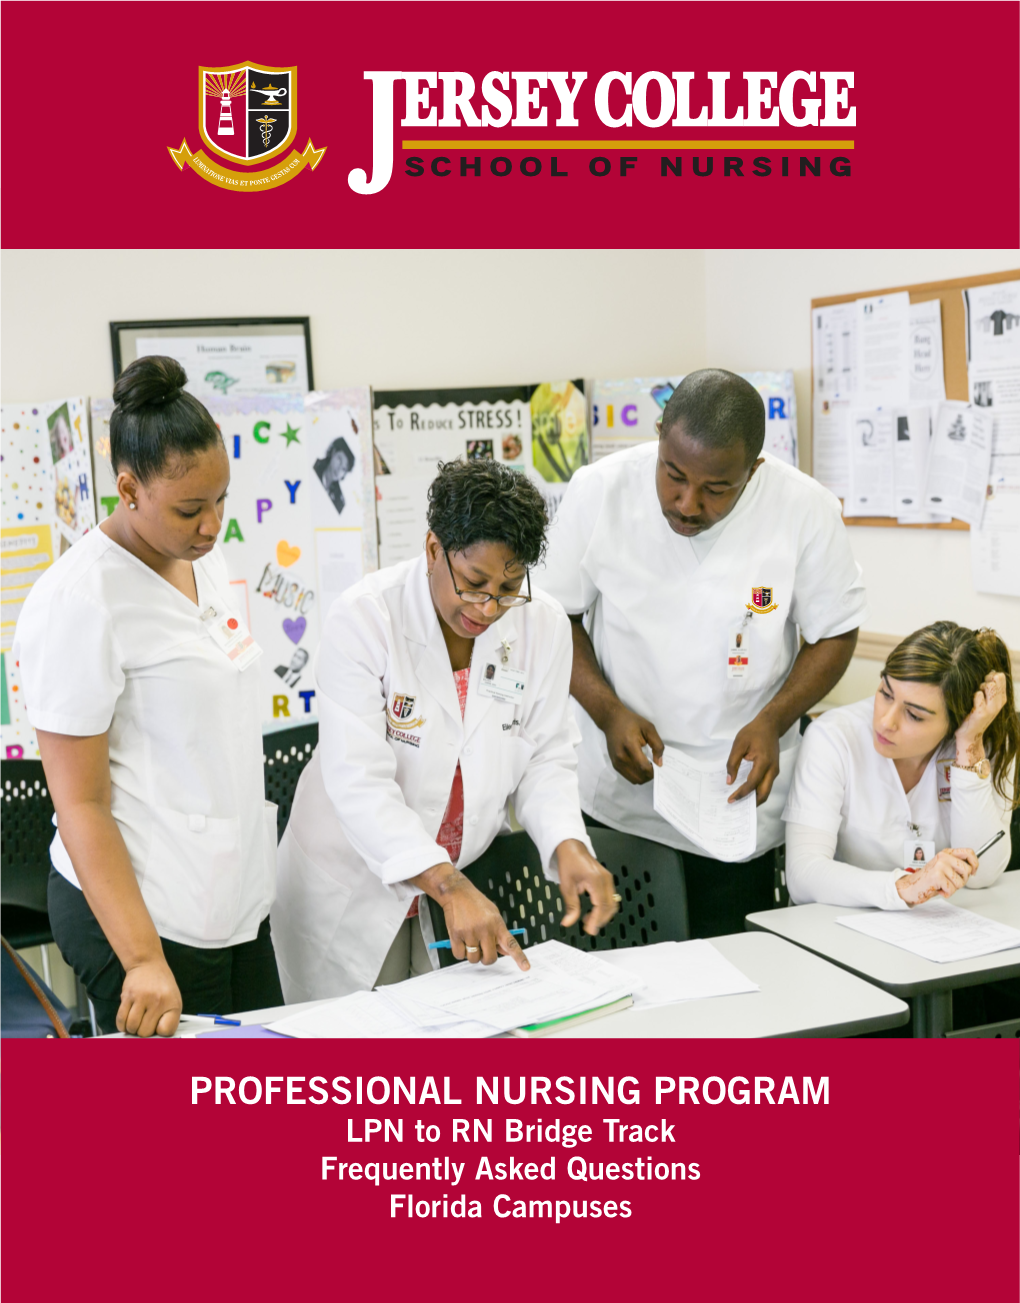 PROFESSIONAL NURSING PROGRAM LPN to RN Bridge Track Frequently Asked Questions Florida Campuses